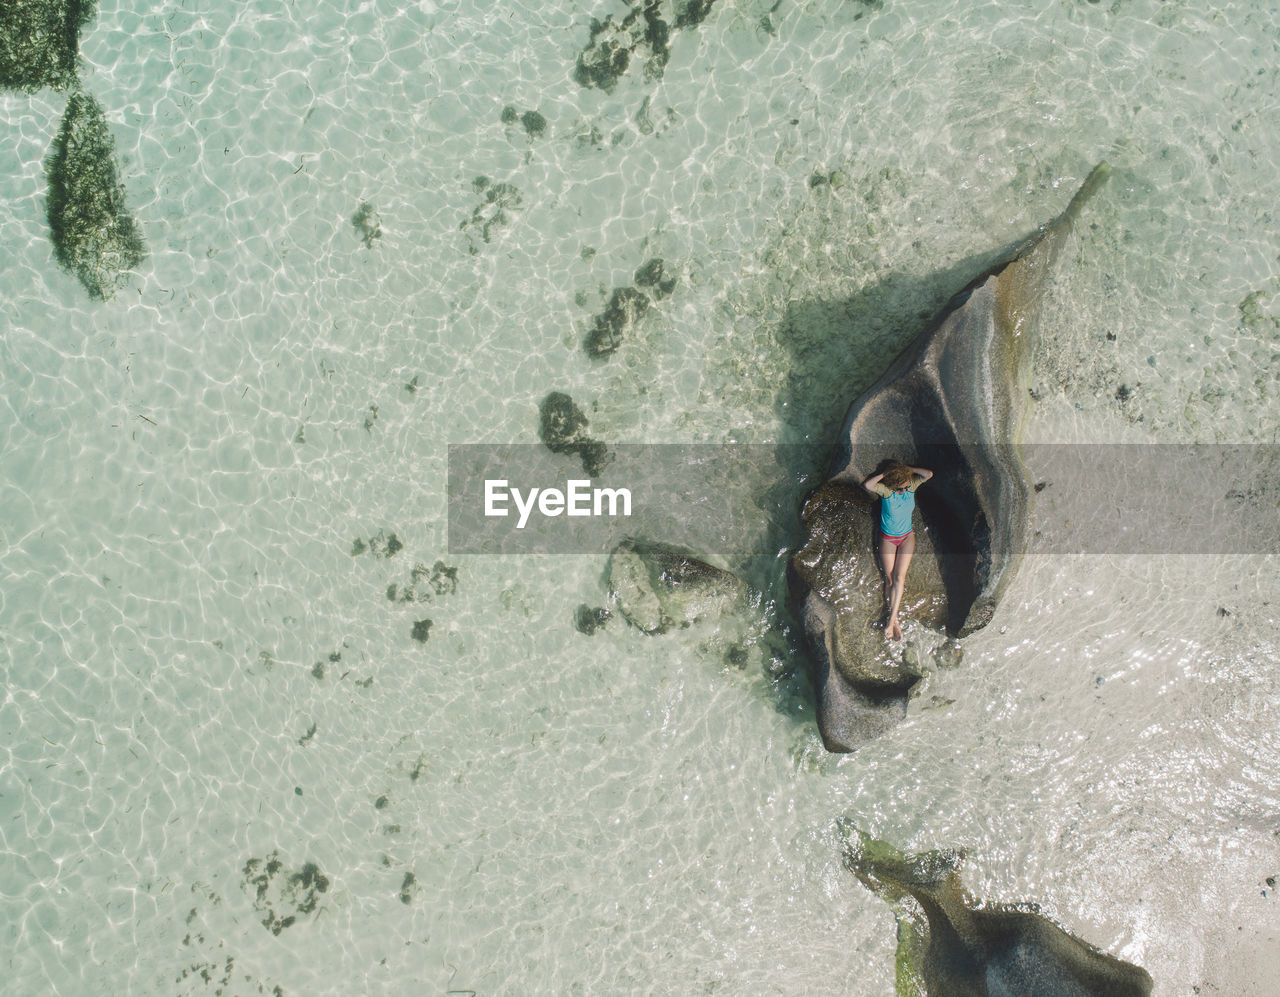 HIGH ANGLE VIEW OF BOY SWIMMING IN SEA